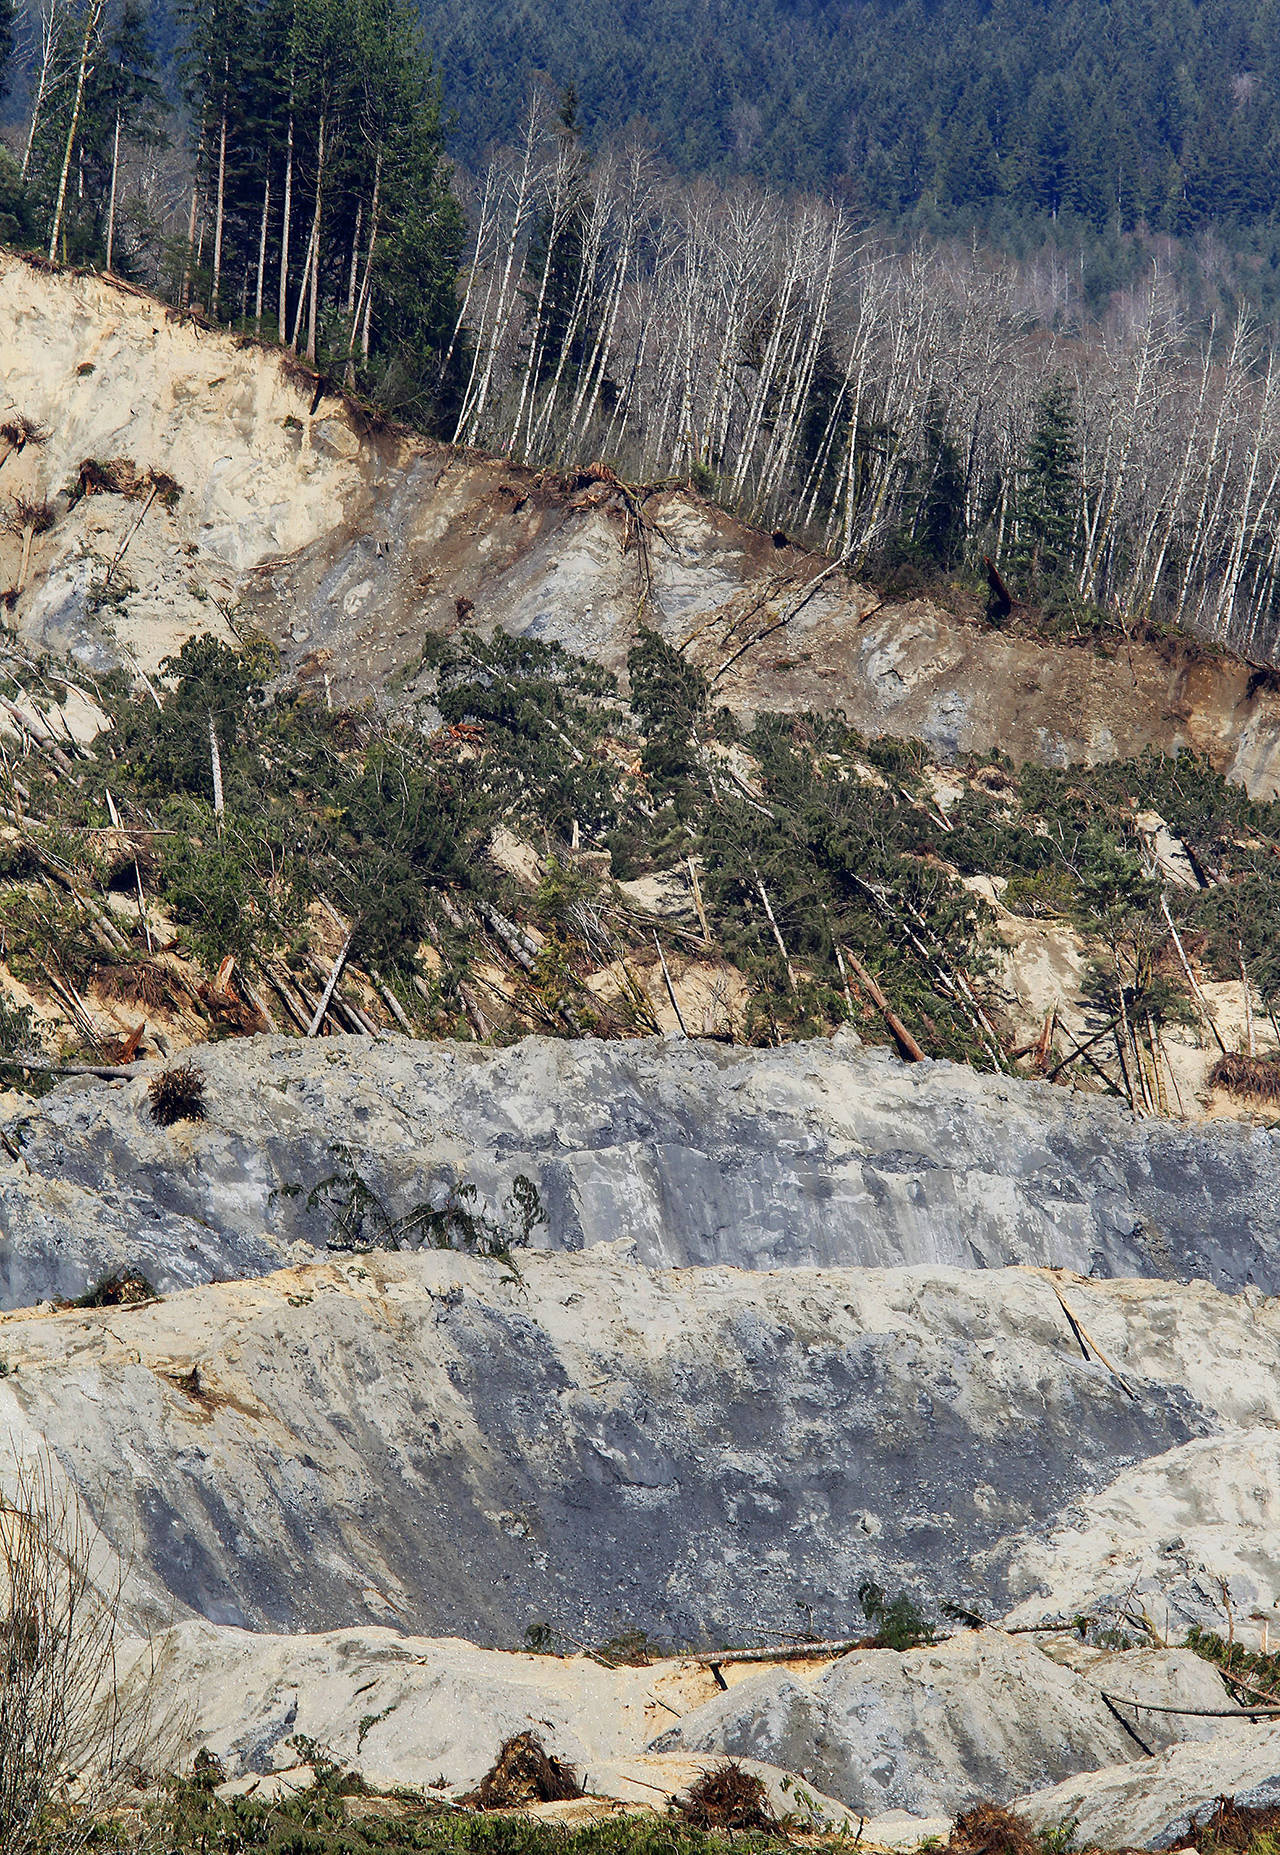 Rescue and recovery crews work at the site of the fatal mudslide near Oso on April 1, 2014. (Mark Mulligan / Herald file)